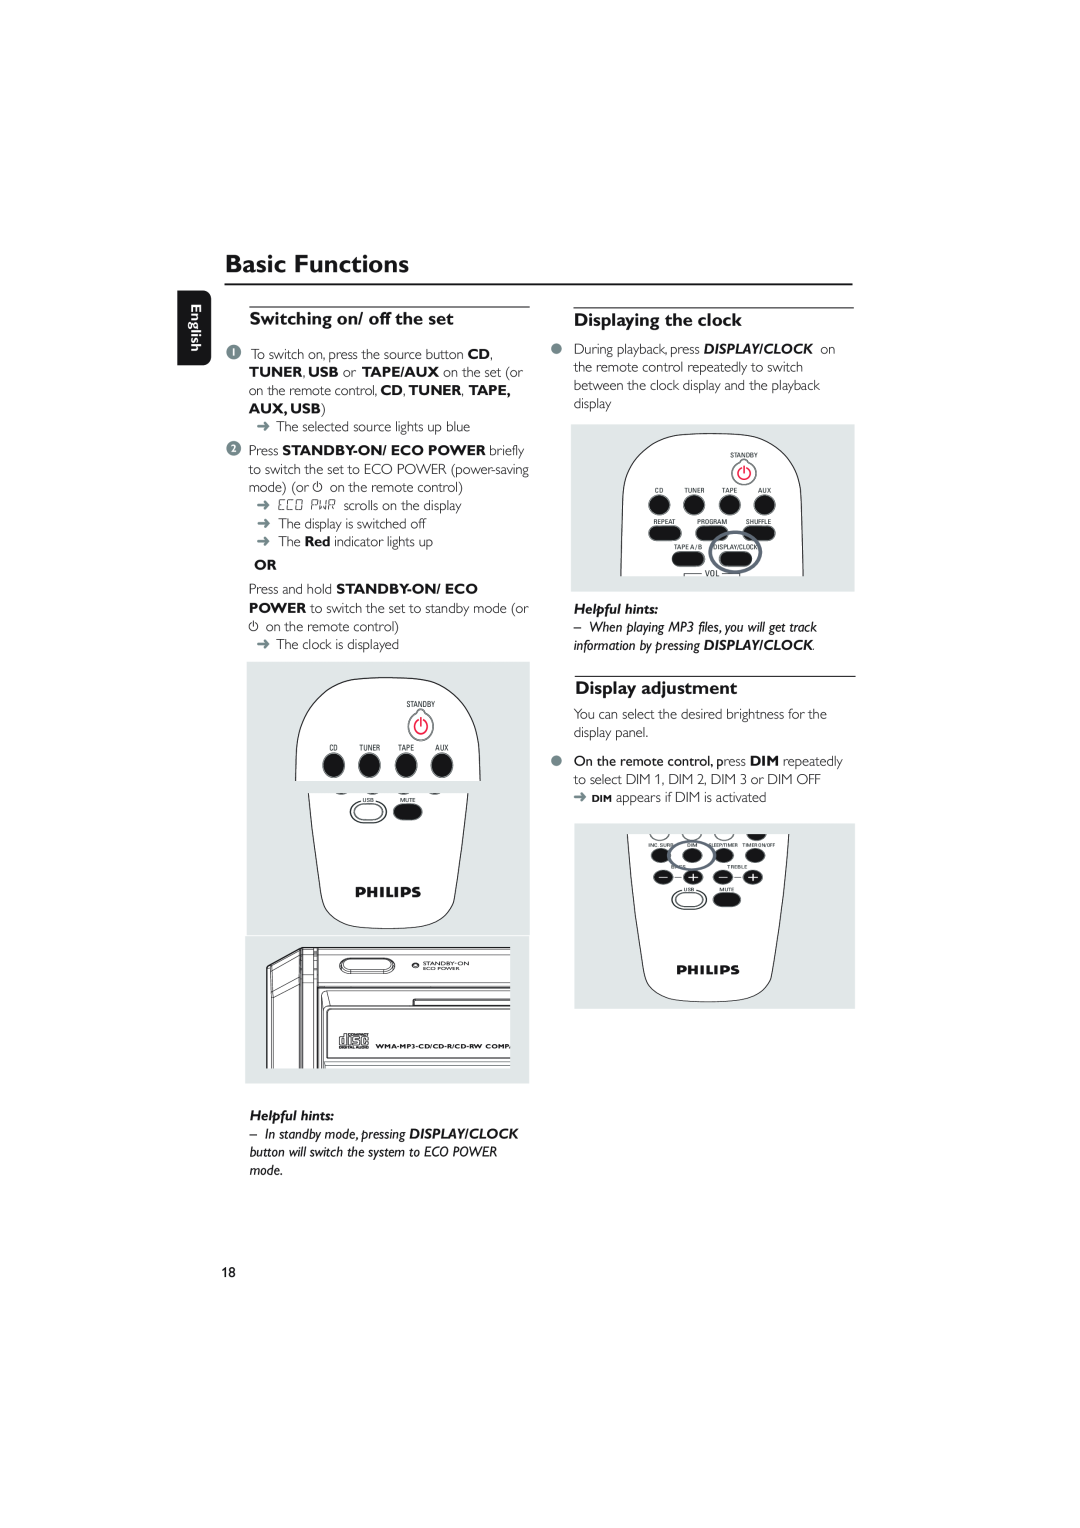 Philips MCM760 owner manual Basic Functions, Switching on/ off the set, Displaying the clock, Display adjustment, English 